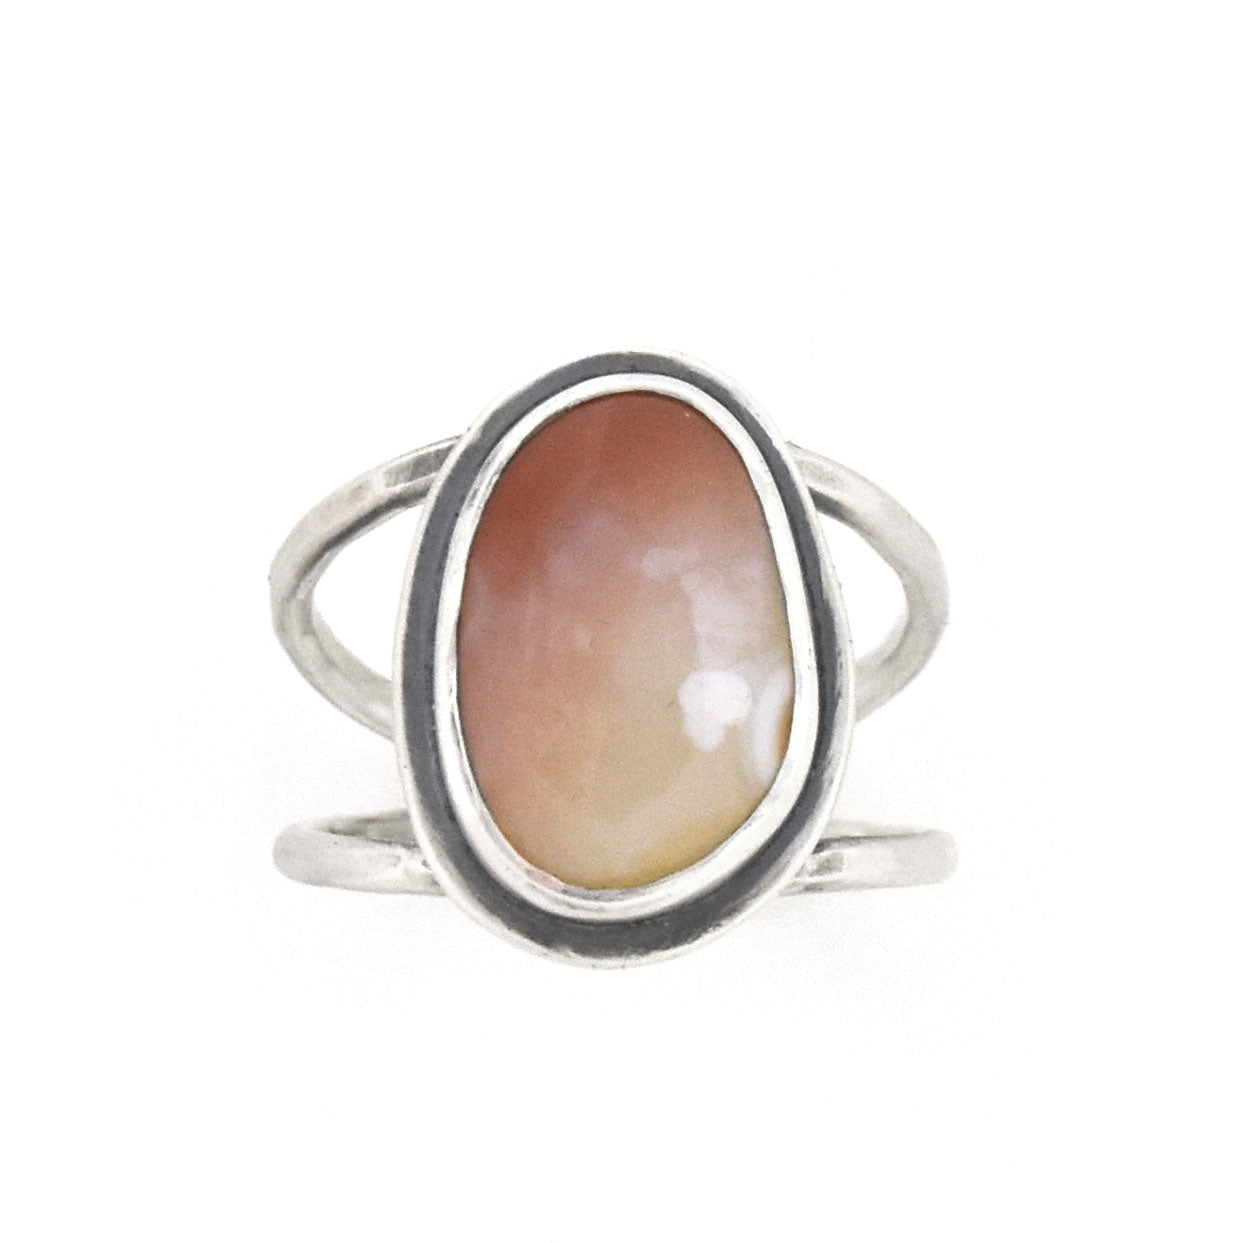 Lake Superior Agate Ring - Size 7.25 - Beth Millner Jewelry